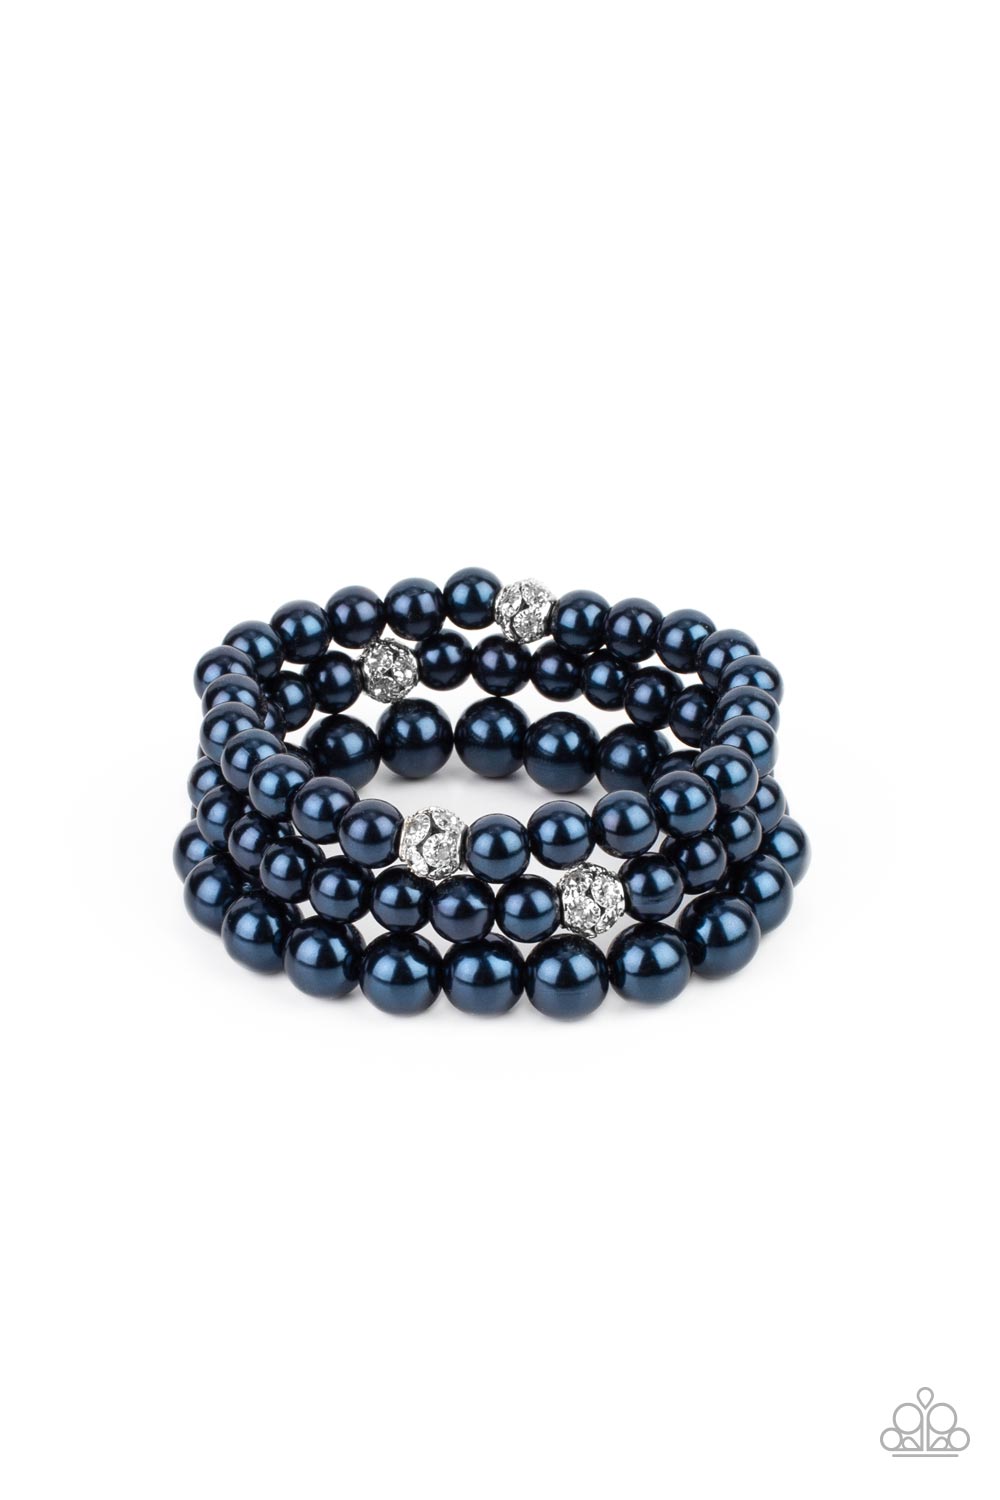 Here Comes the Heiress - Blue Pearl Stretch Bracelets infused with white rhinestone encrusted silver beads, a bubbly collection of mismatched blue pearls are threaded along stretchy bands around the wrist for a vintage inspired layered look.  Sold as one set of three bracelets.